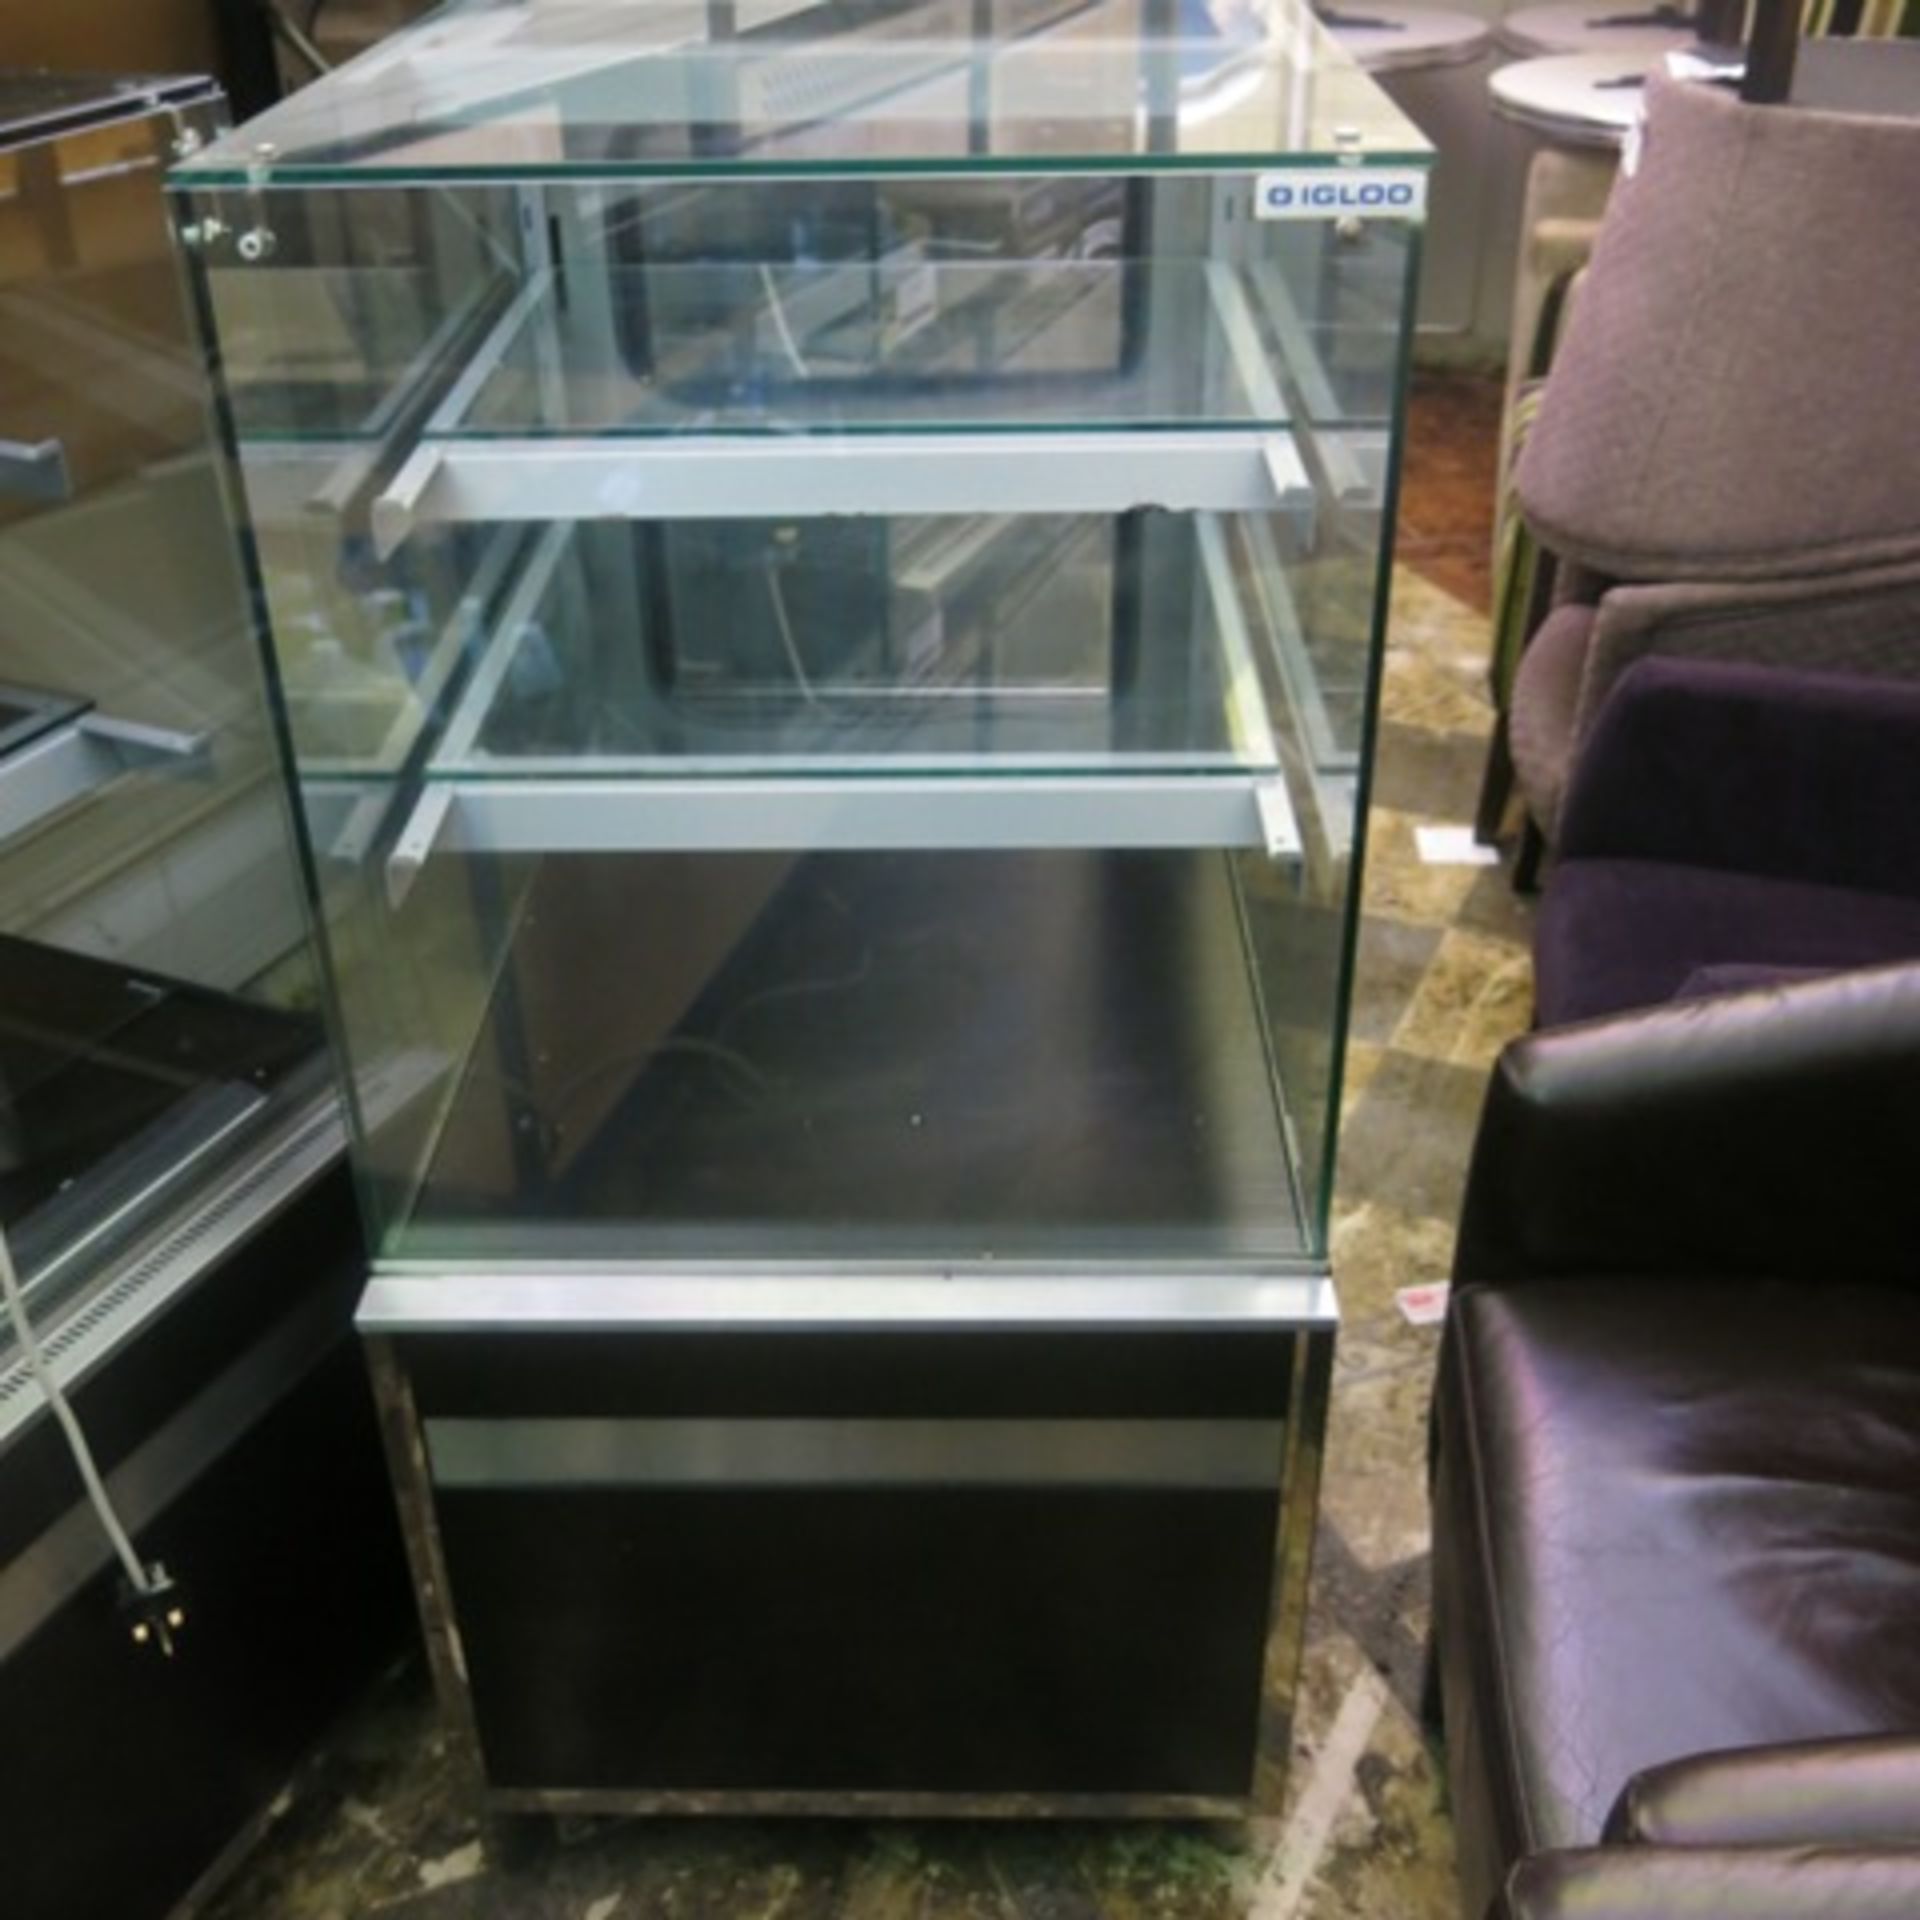 Igloo Refrigerated Glass Display Cabinet with Rear Door & 2 Glass Shelves, Model Gastroline Cube 0. - Image 6 of 7